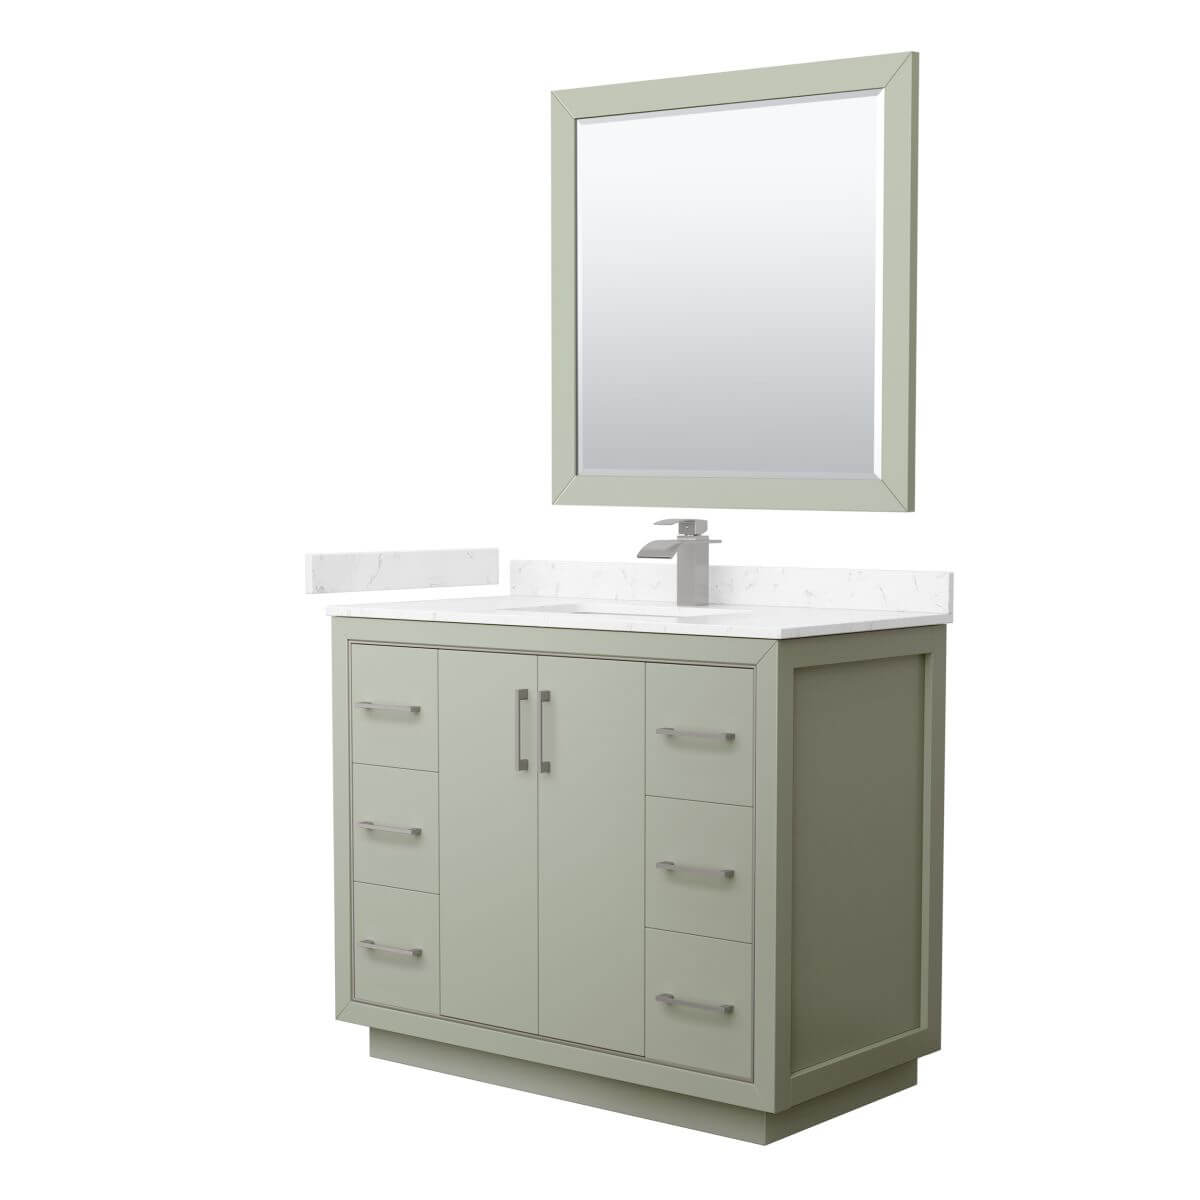 Wyndham Collection WCF111142SLGC2UNSM34 Icon 42 inch Single Bathroom Vanity in Light Green with Carrara Cultured Marble Countertop, Undermount Square Sink, Brushed Nickel Trim and 34 Inch Mirror